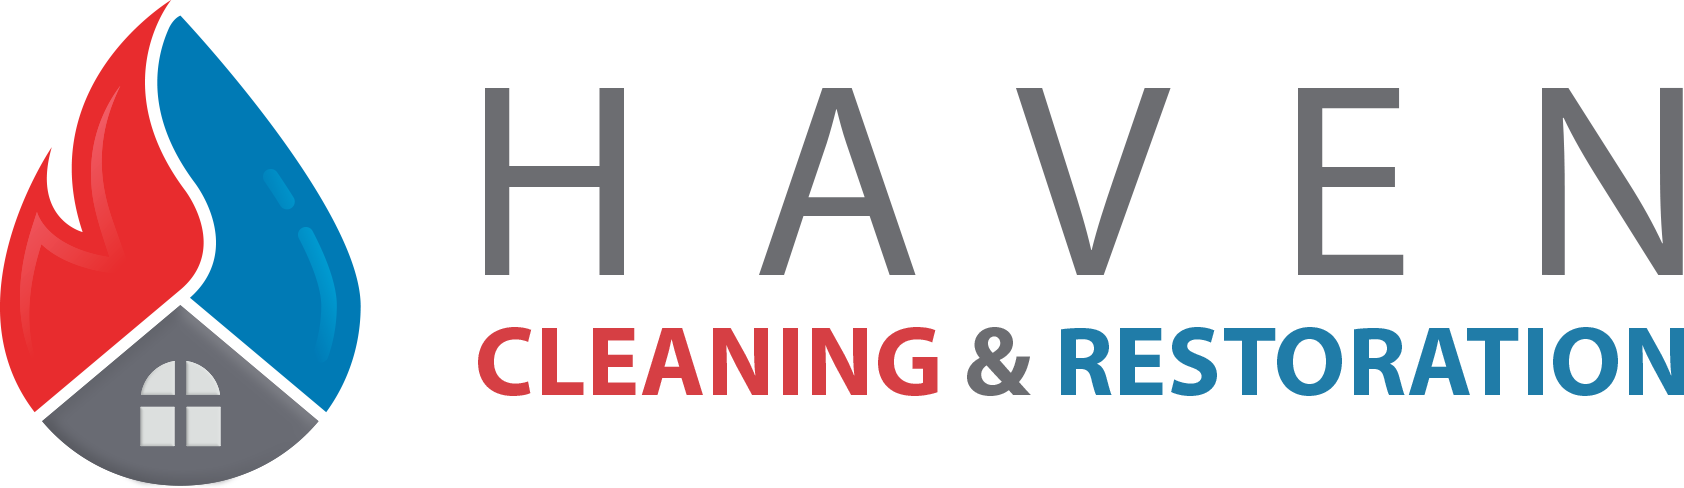 Haven Cleaning and Restoration, Inc. Logo